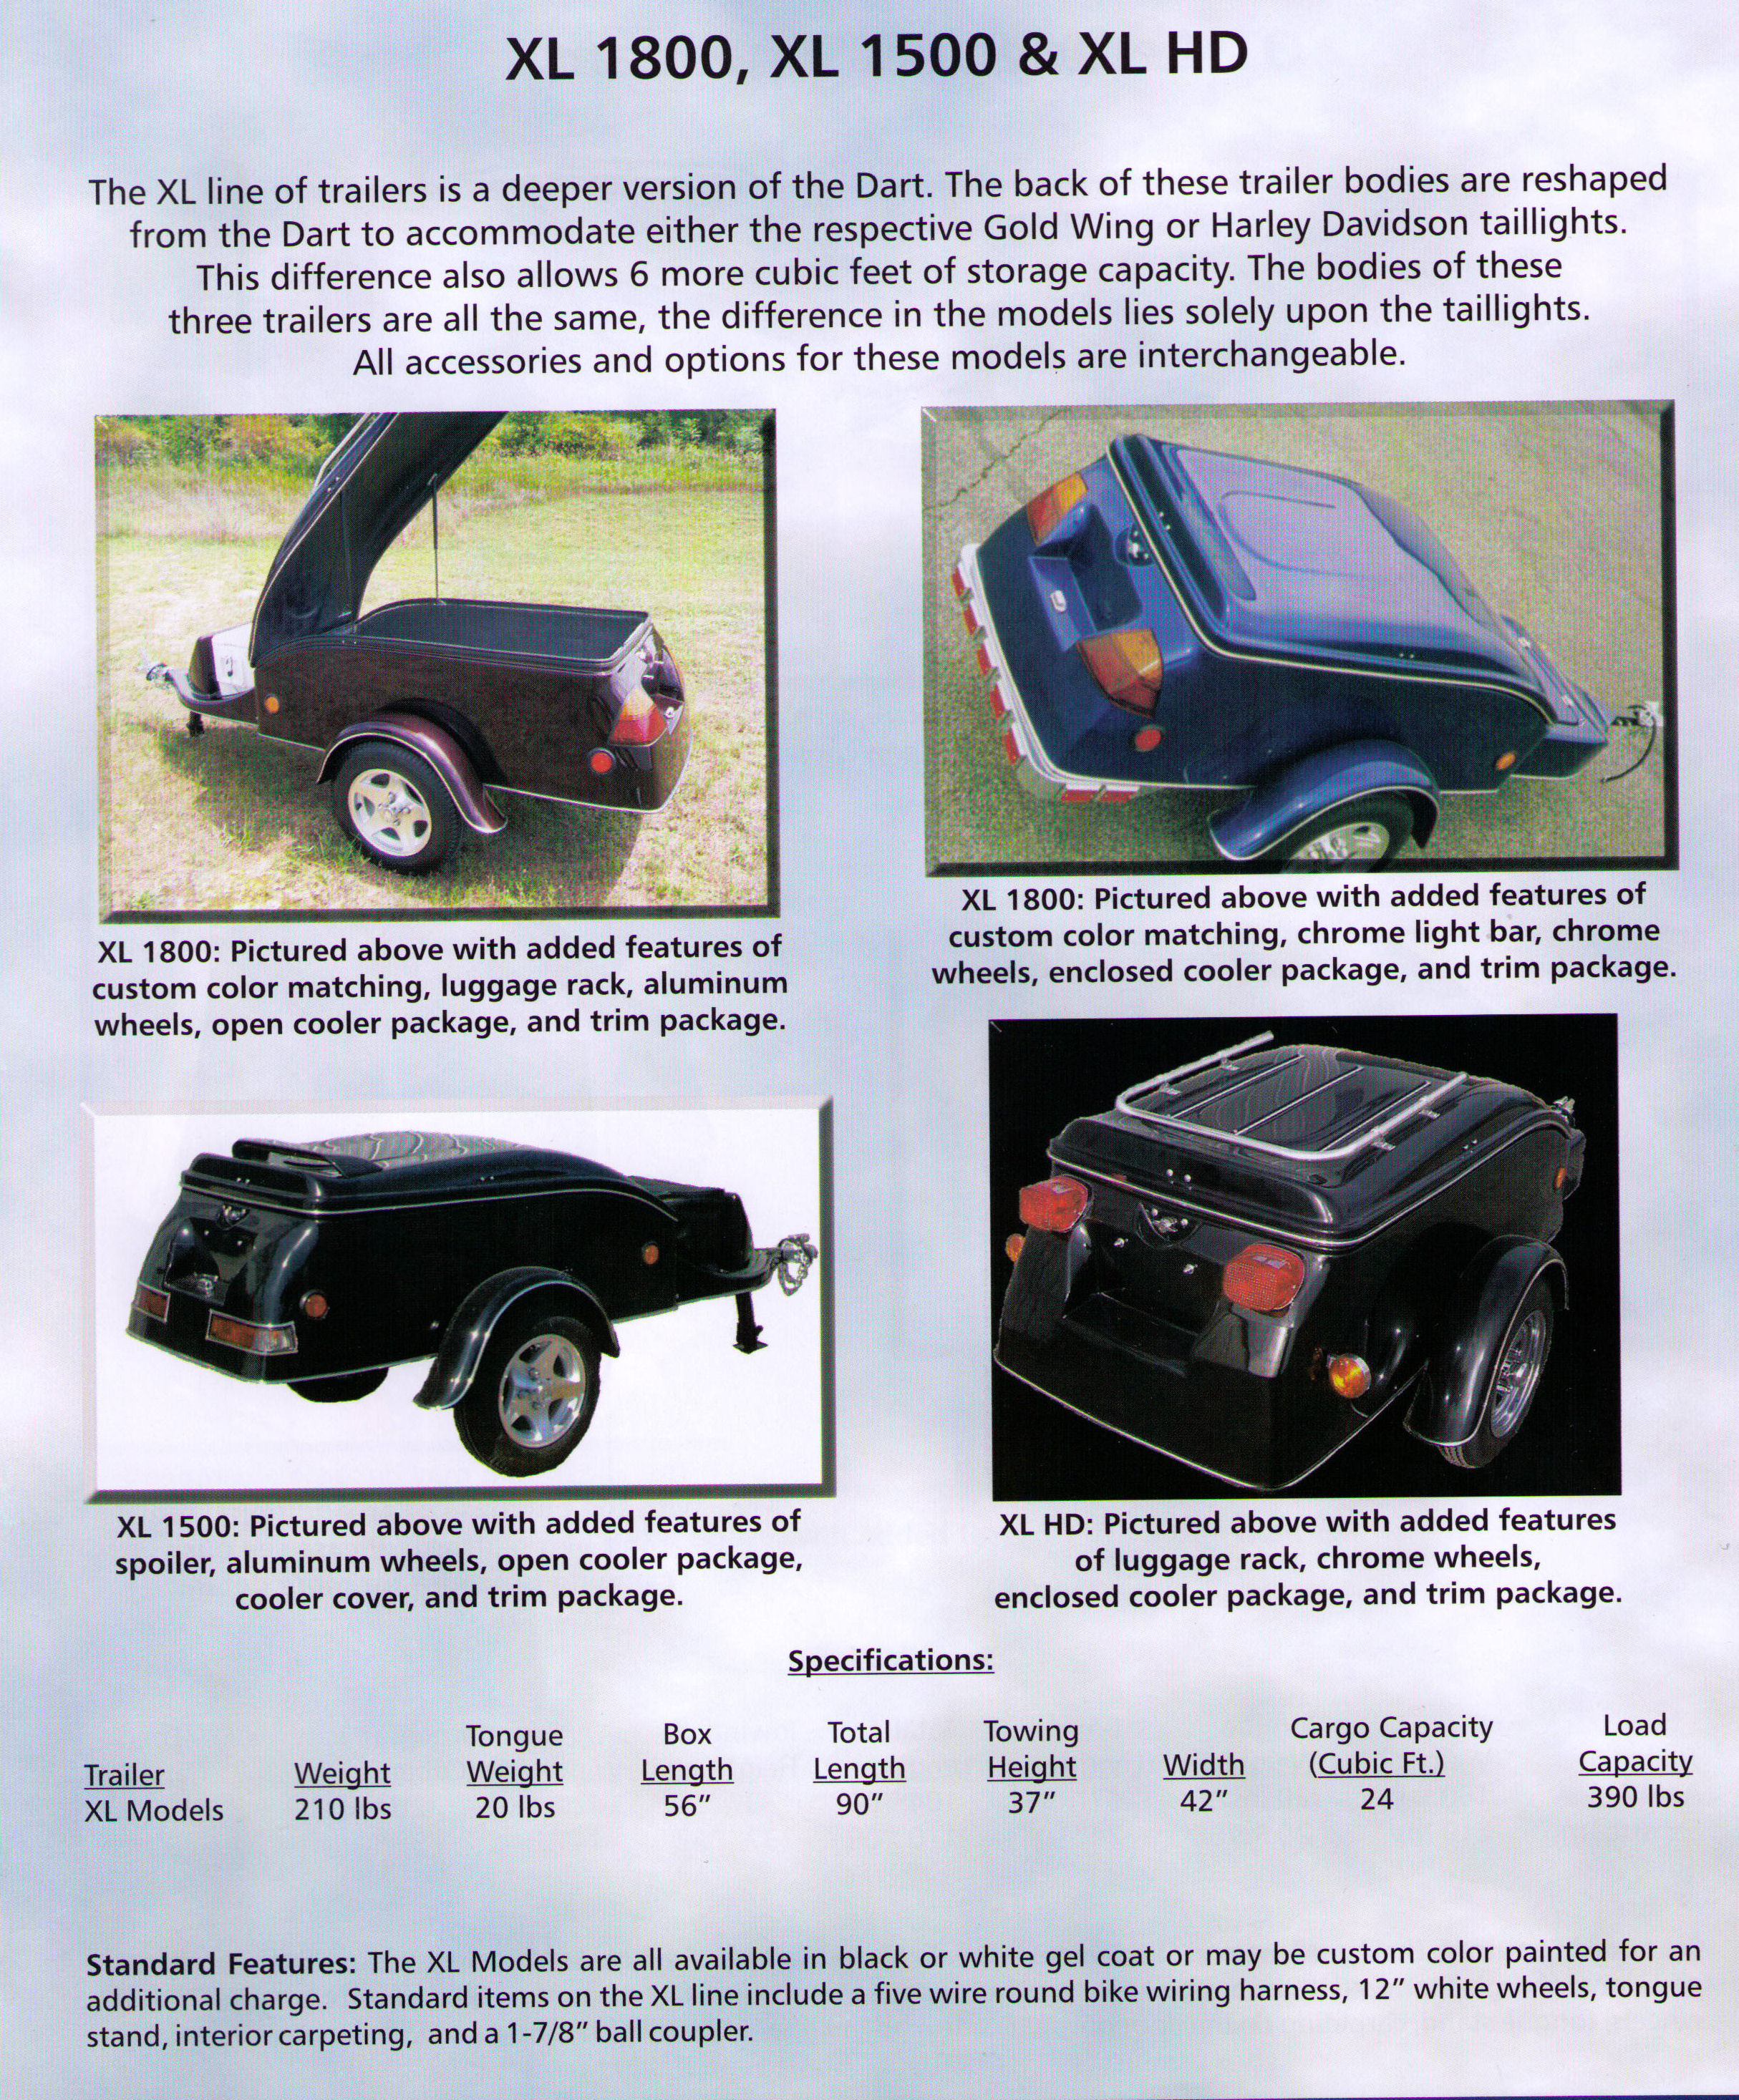 Specifications/Features Models XLHD Motorcycle Towable Cargo Trailers